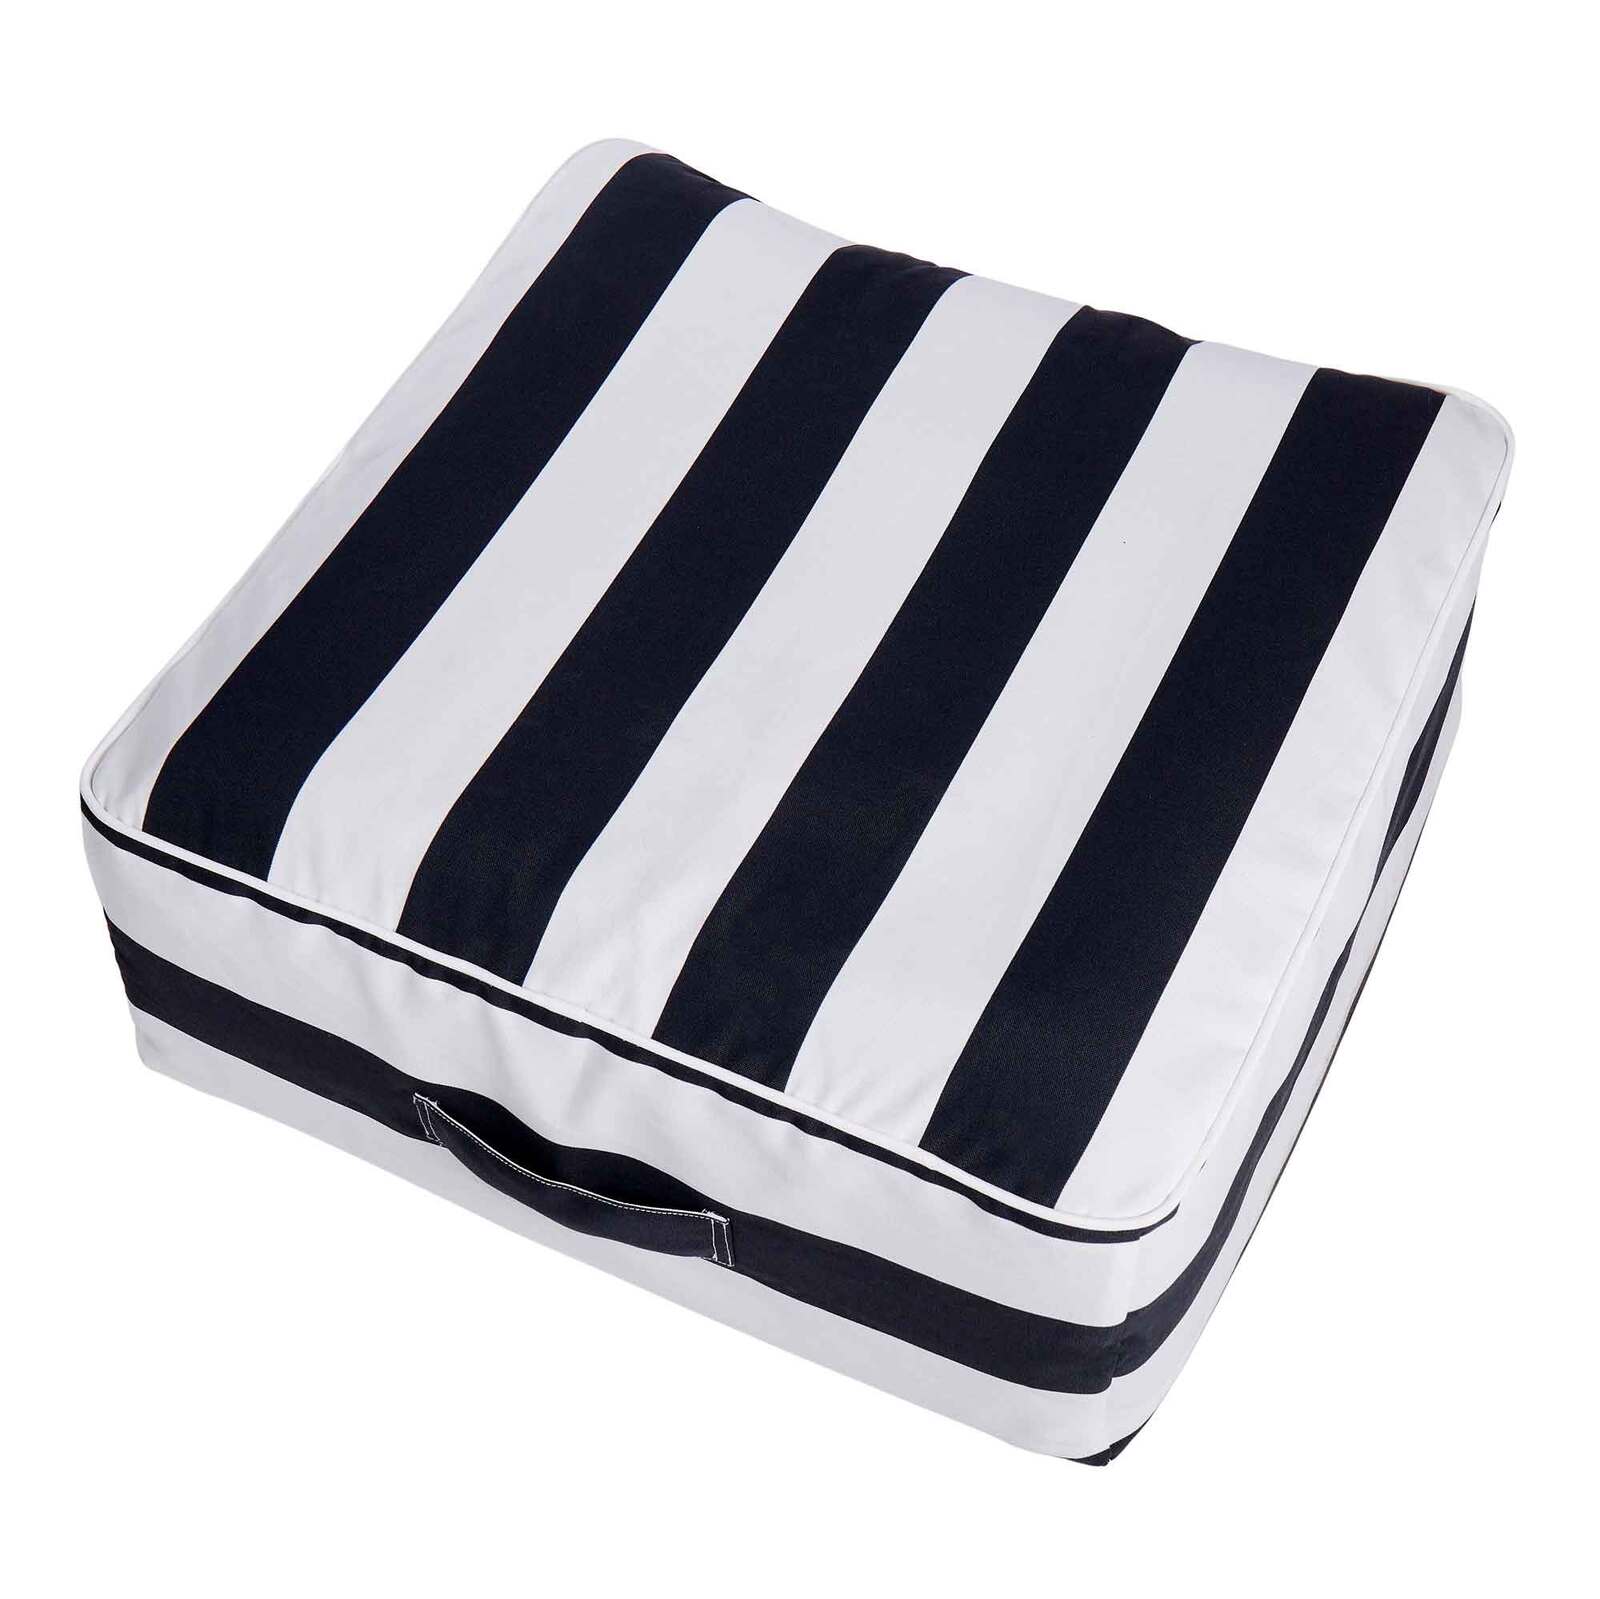 Deck Stripe Inflatable Outdoor Ottoman